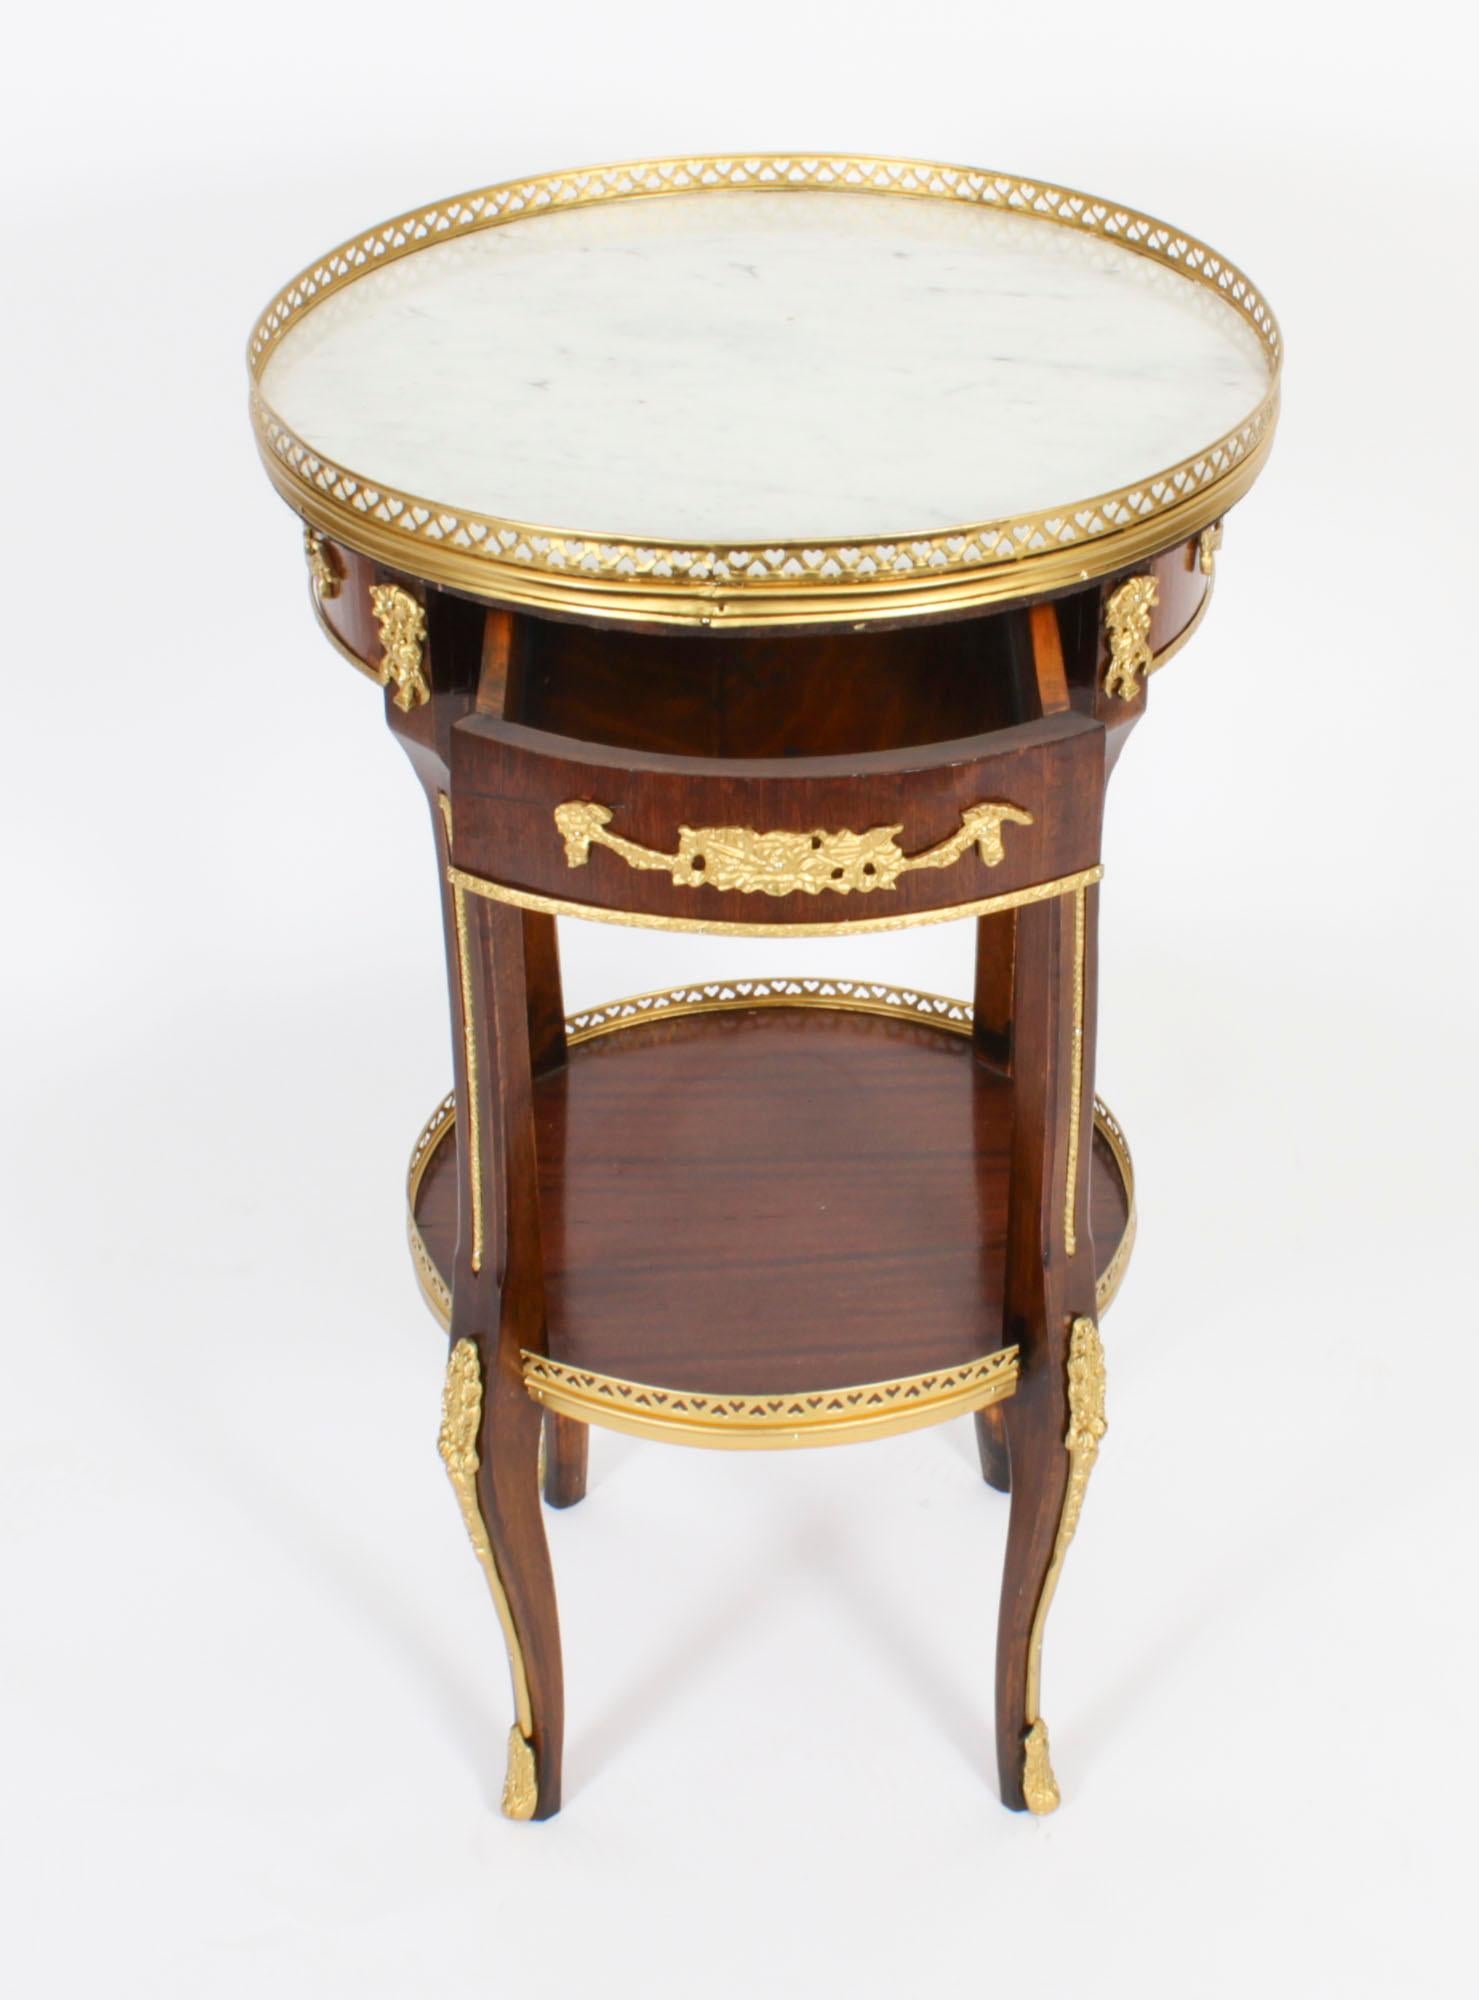 Antique French Empire Marble & Ormolu Occasional Table, 19th Century For Sale 6